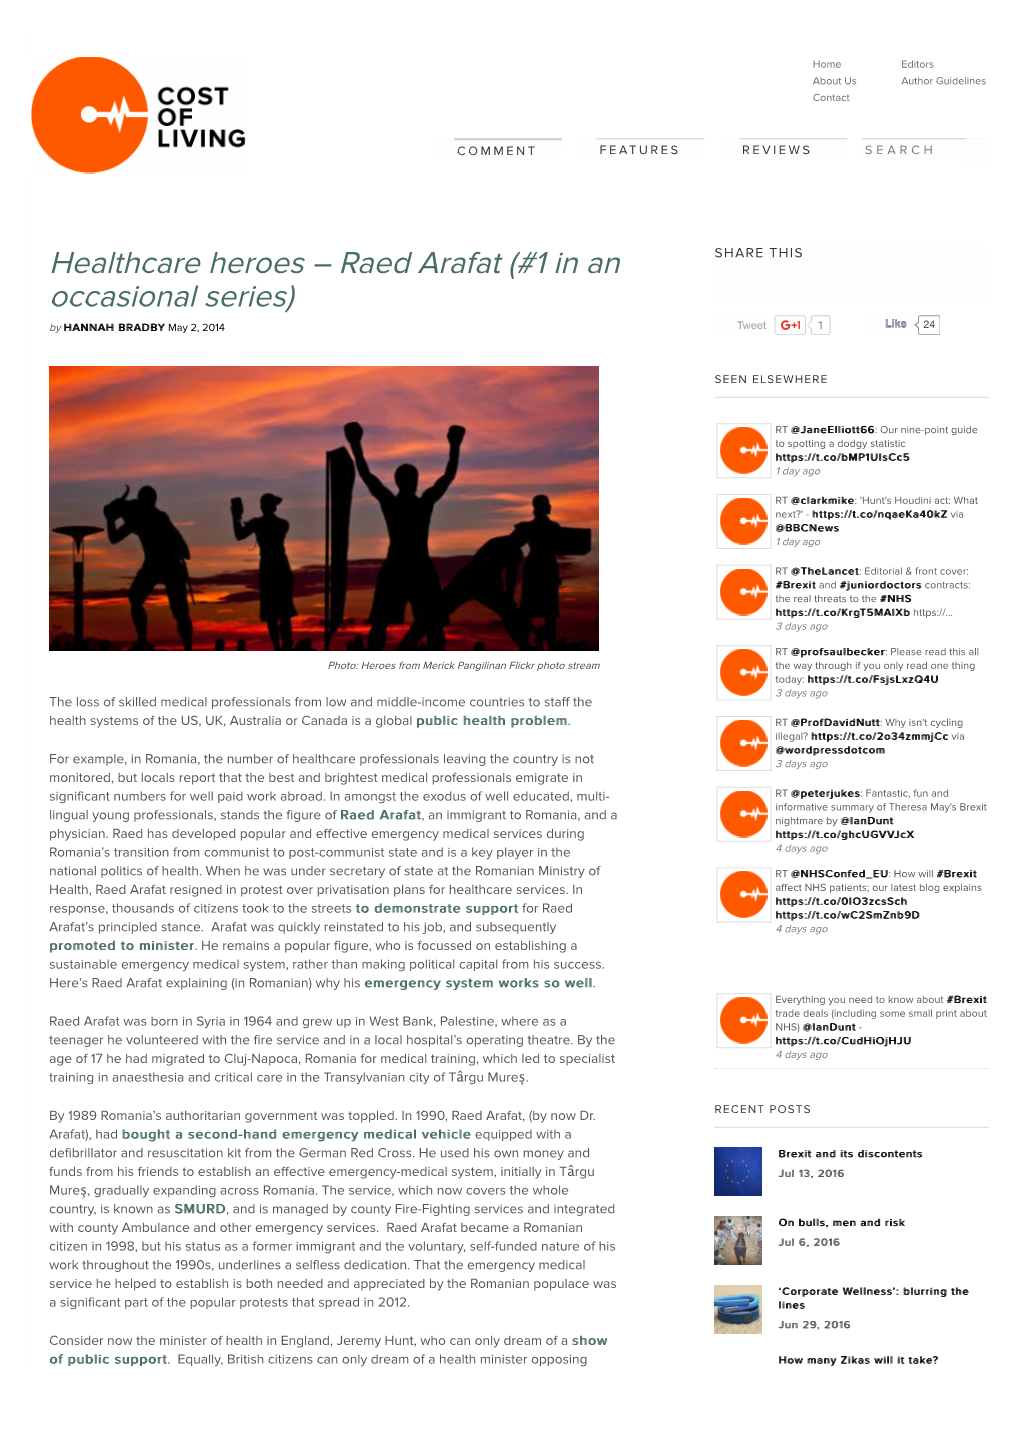 Healthcare Heroes – Raed Arafat (#1 in an SHARE THIS Occasional Series) by HANNAH BRADBY May 2, 2014 Tweet 1 Like 24